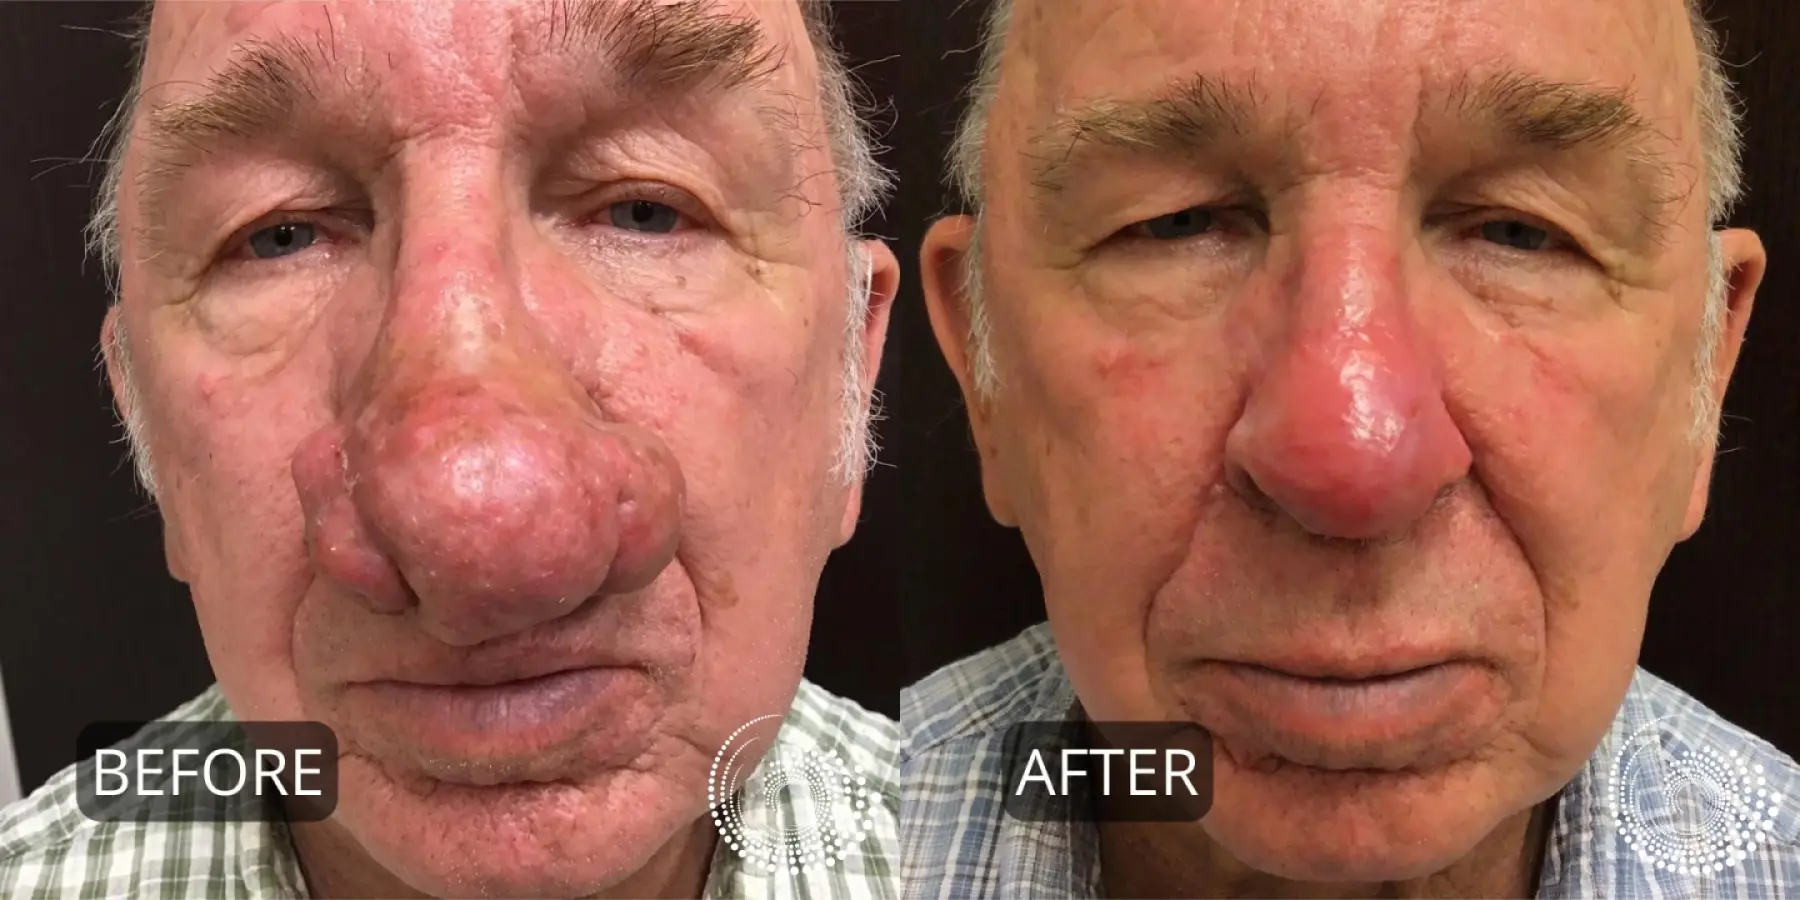 Rhinophyma treatment to reshape nose - Before and After 3